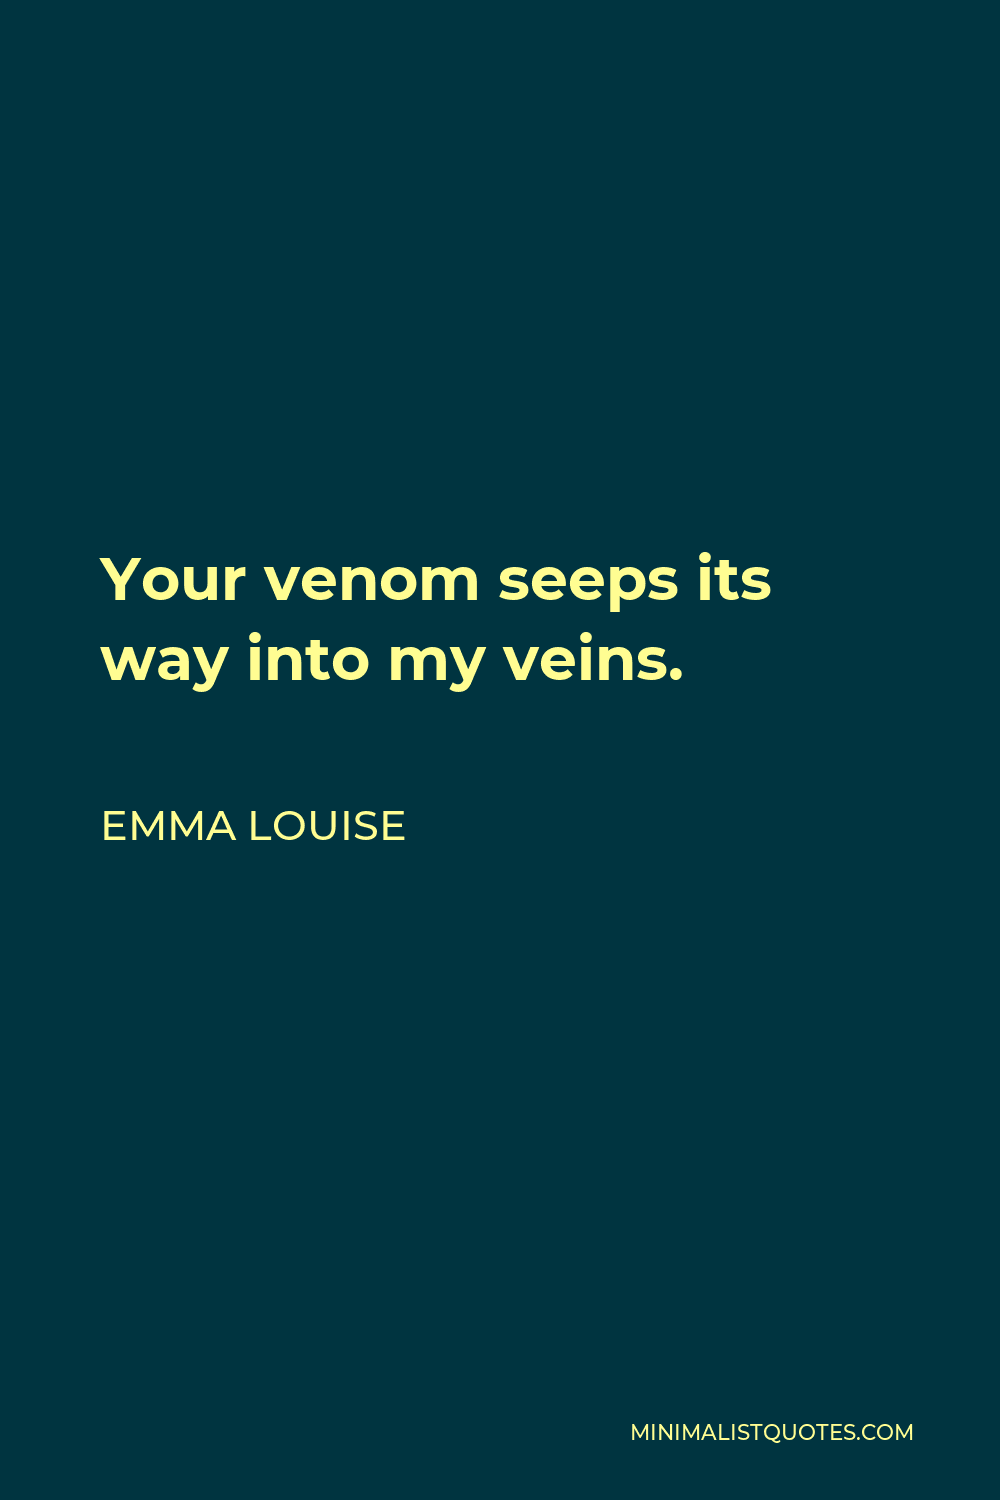 Emma Louise Quote - Your venom seeps its way into my veins.